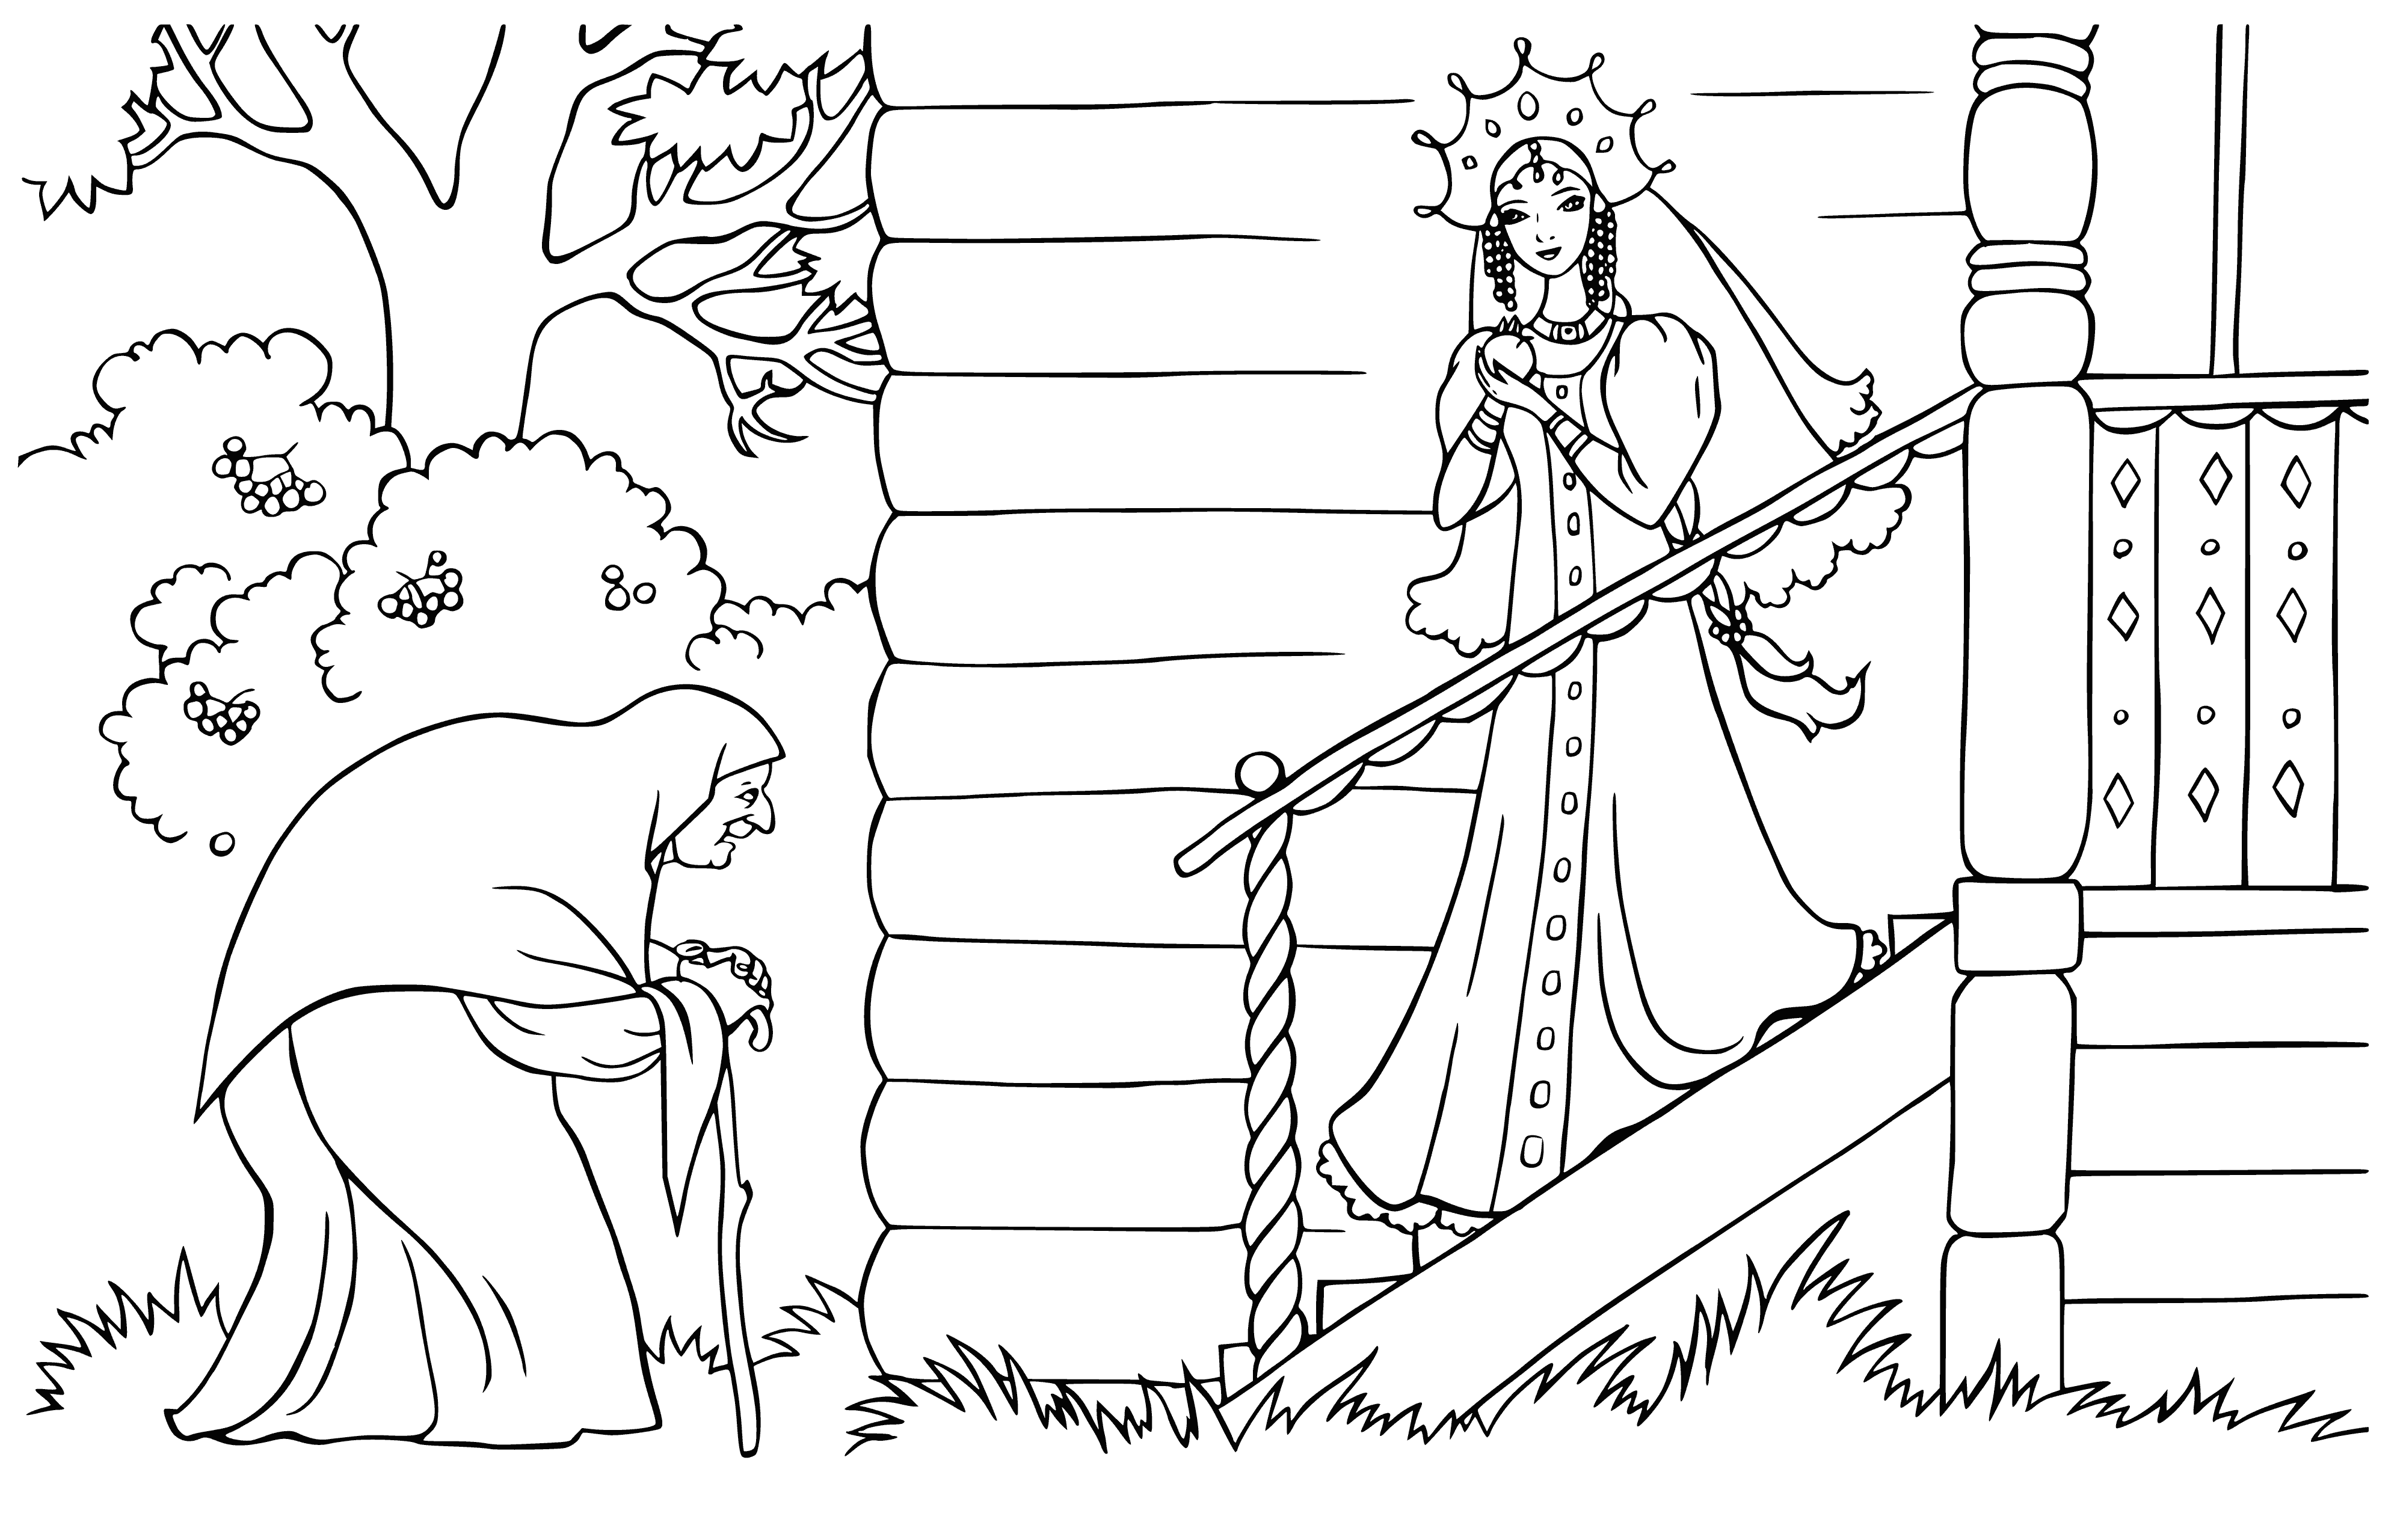 coloring page: The princess has wings and is flying in her pink dress surrounded by fairies in a field with a blue sky.